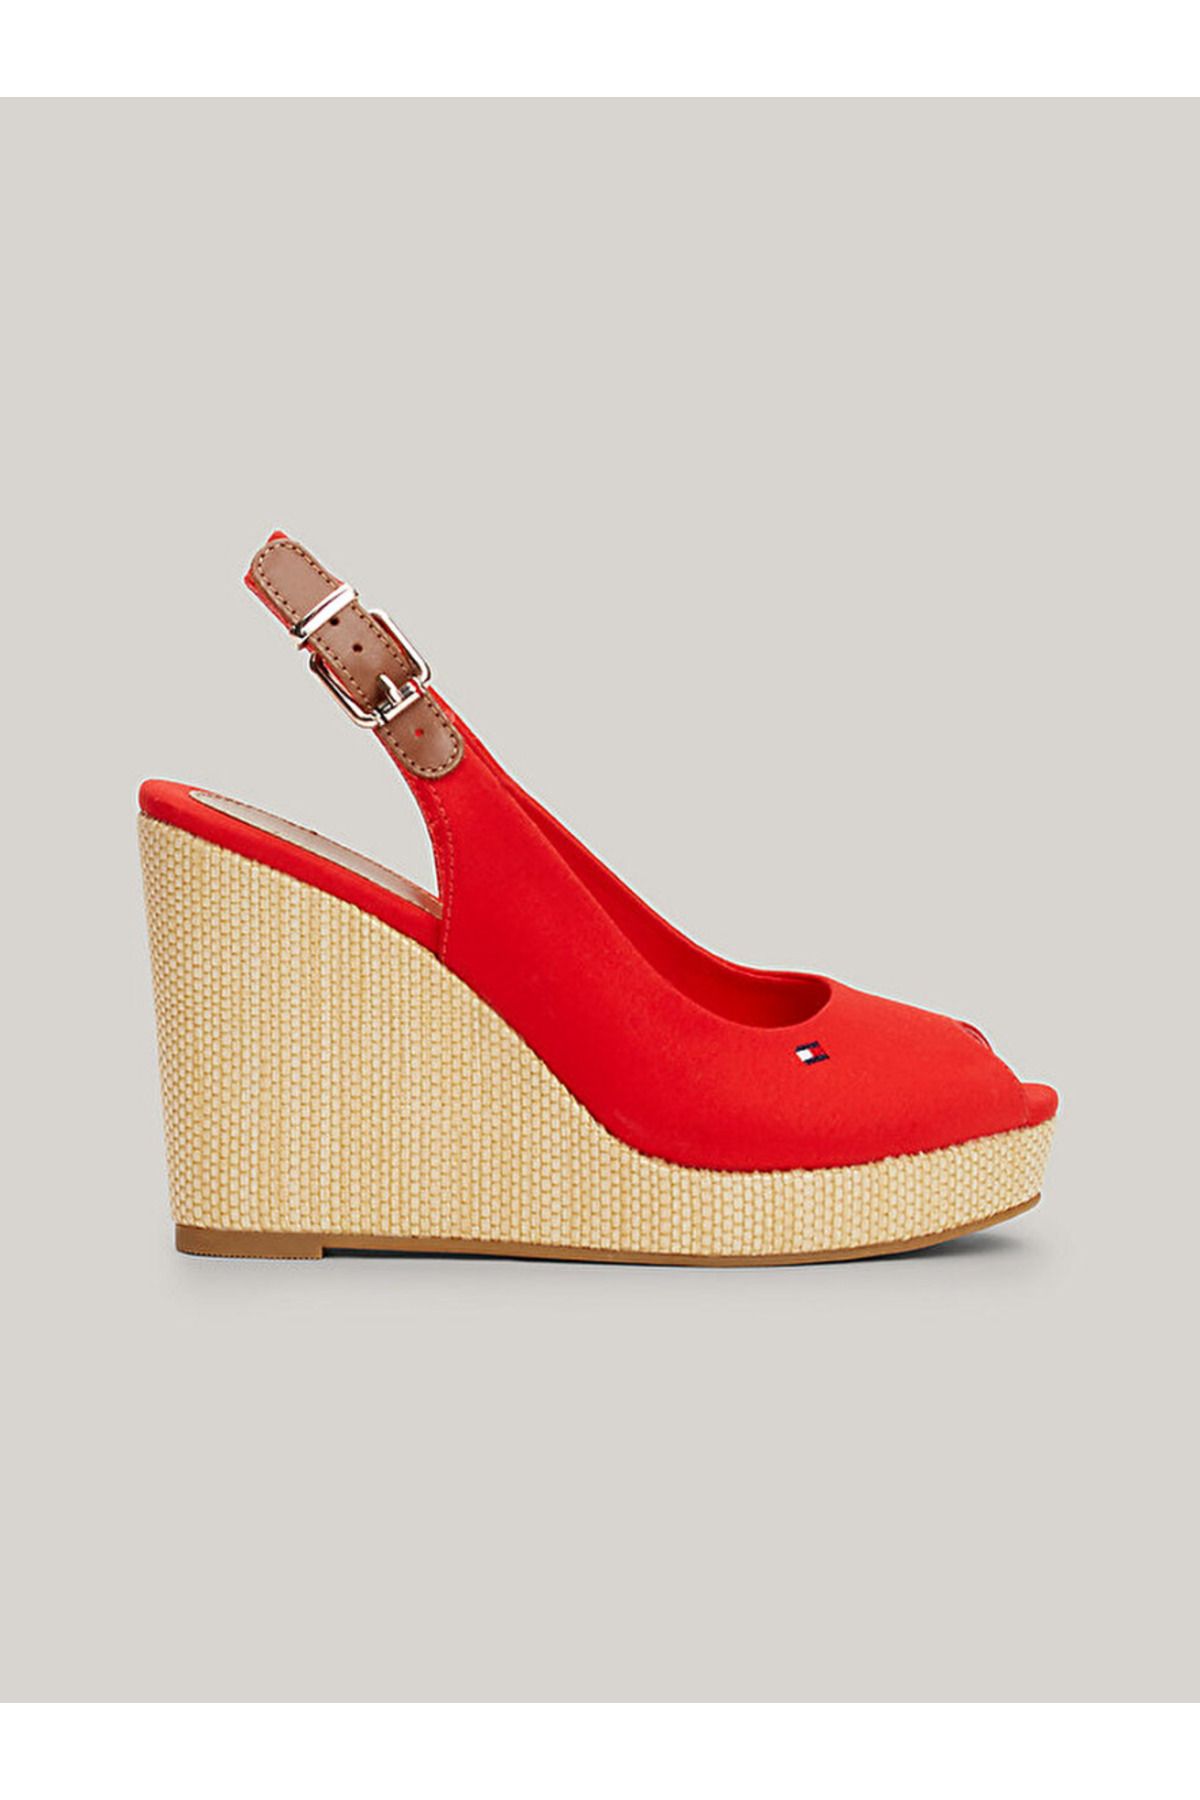 Tommy Hilfiger Iconic Slingback High Wedge Sandals